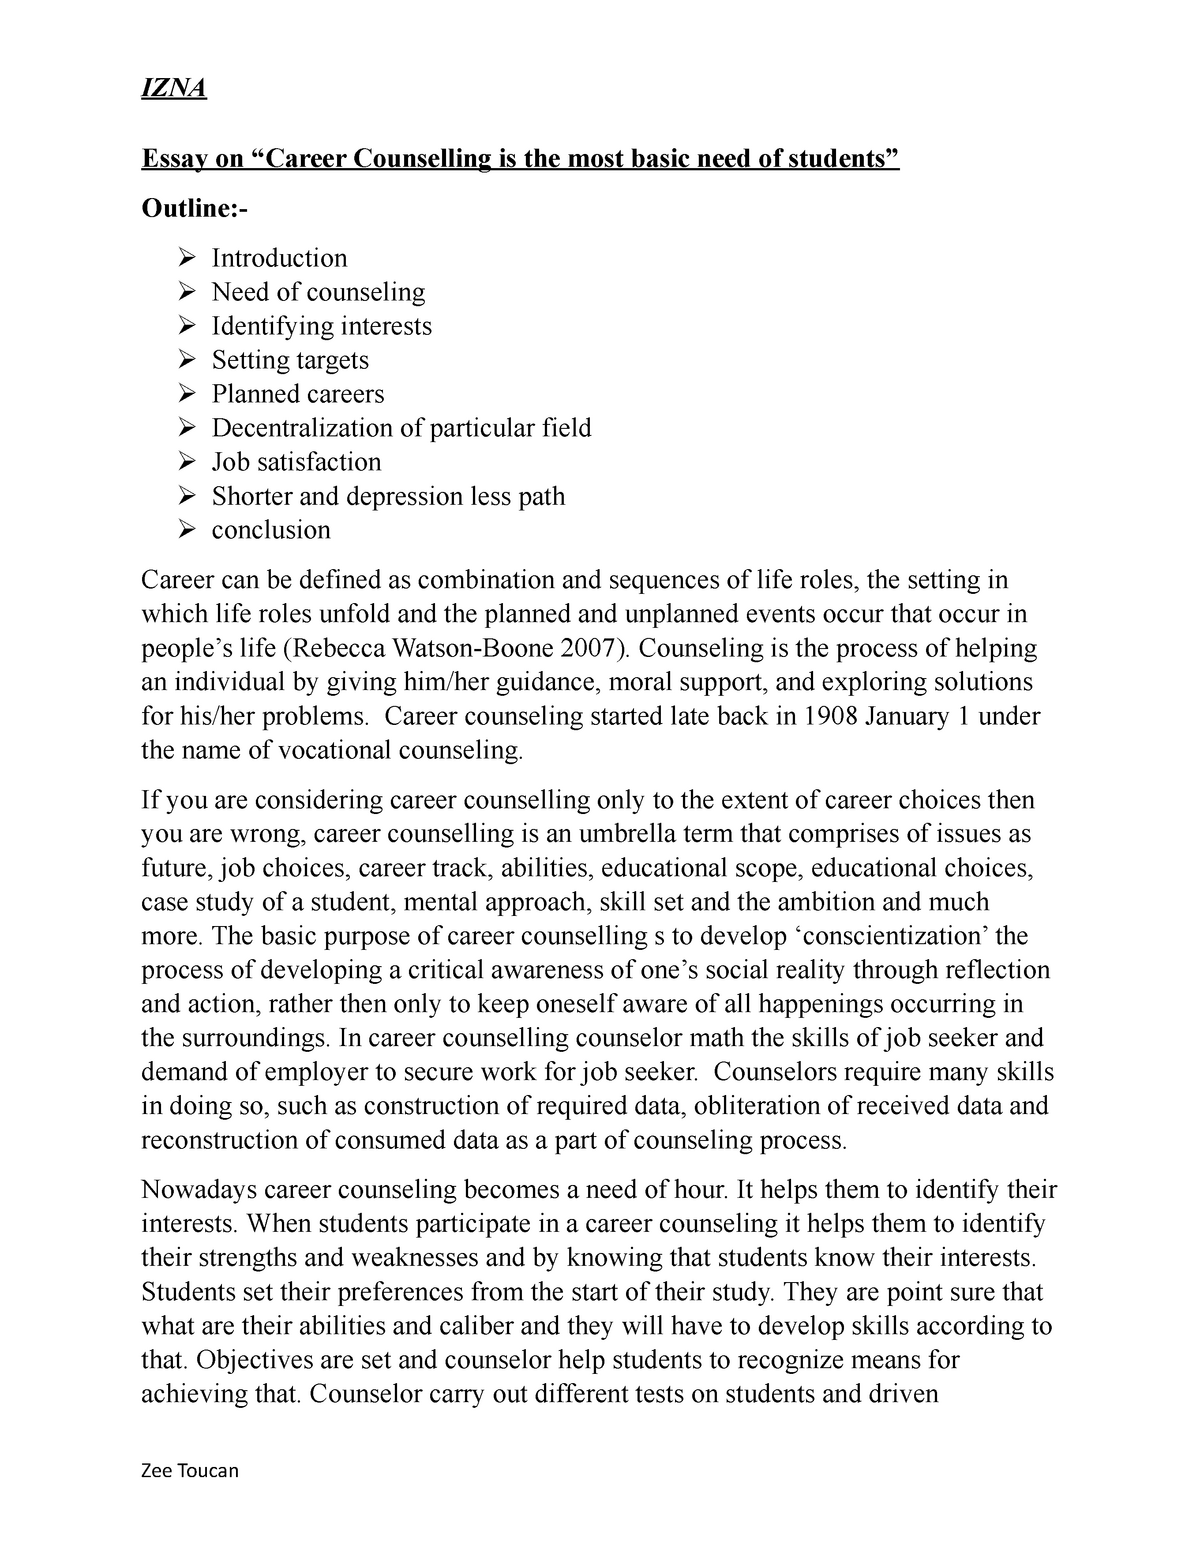 career counseling essay 200 words